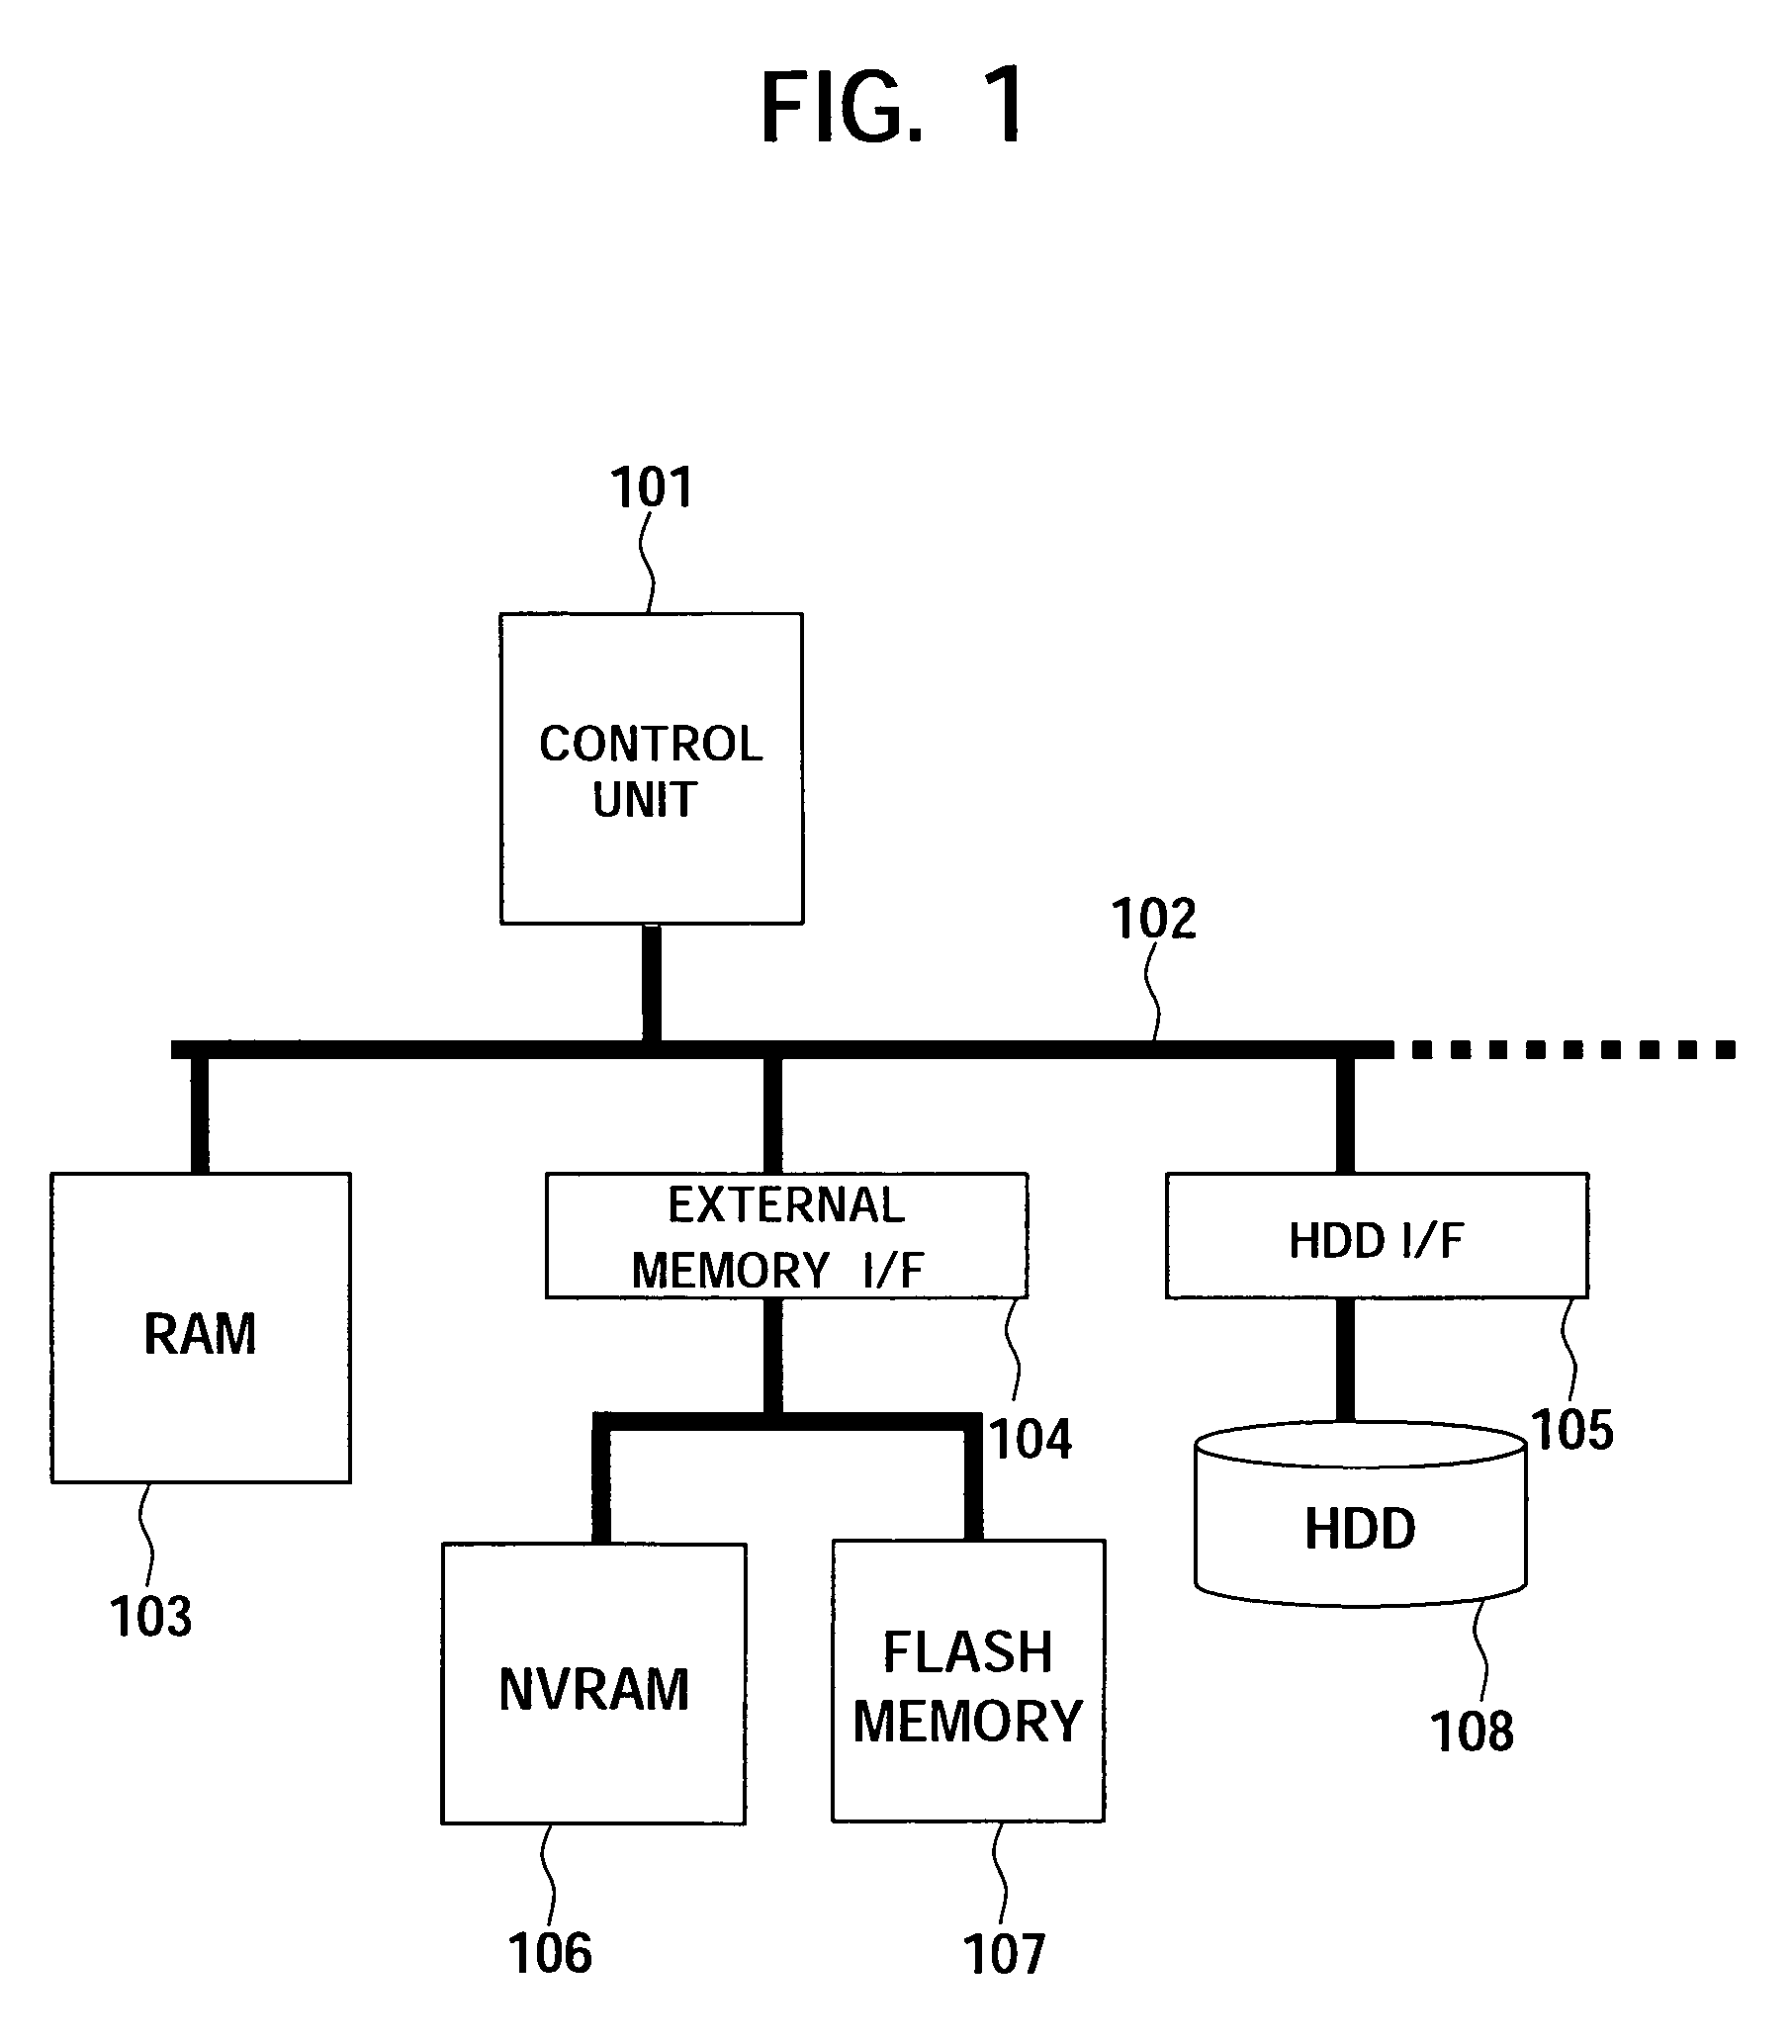 File storage apparatus for storing file data and management information